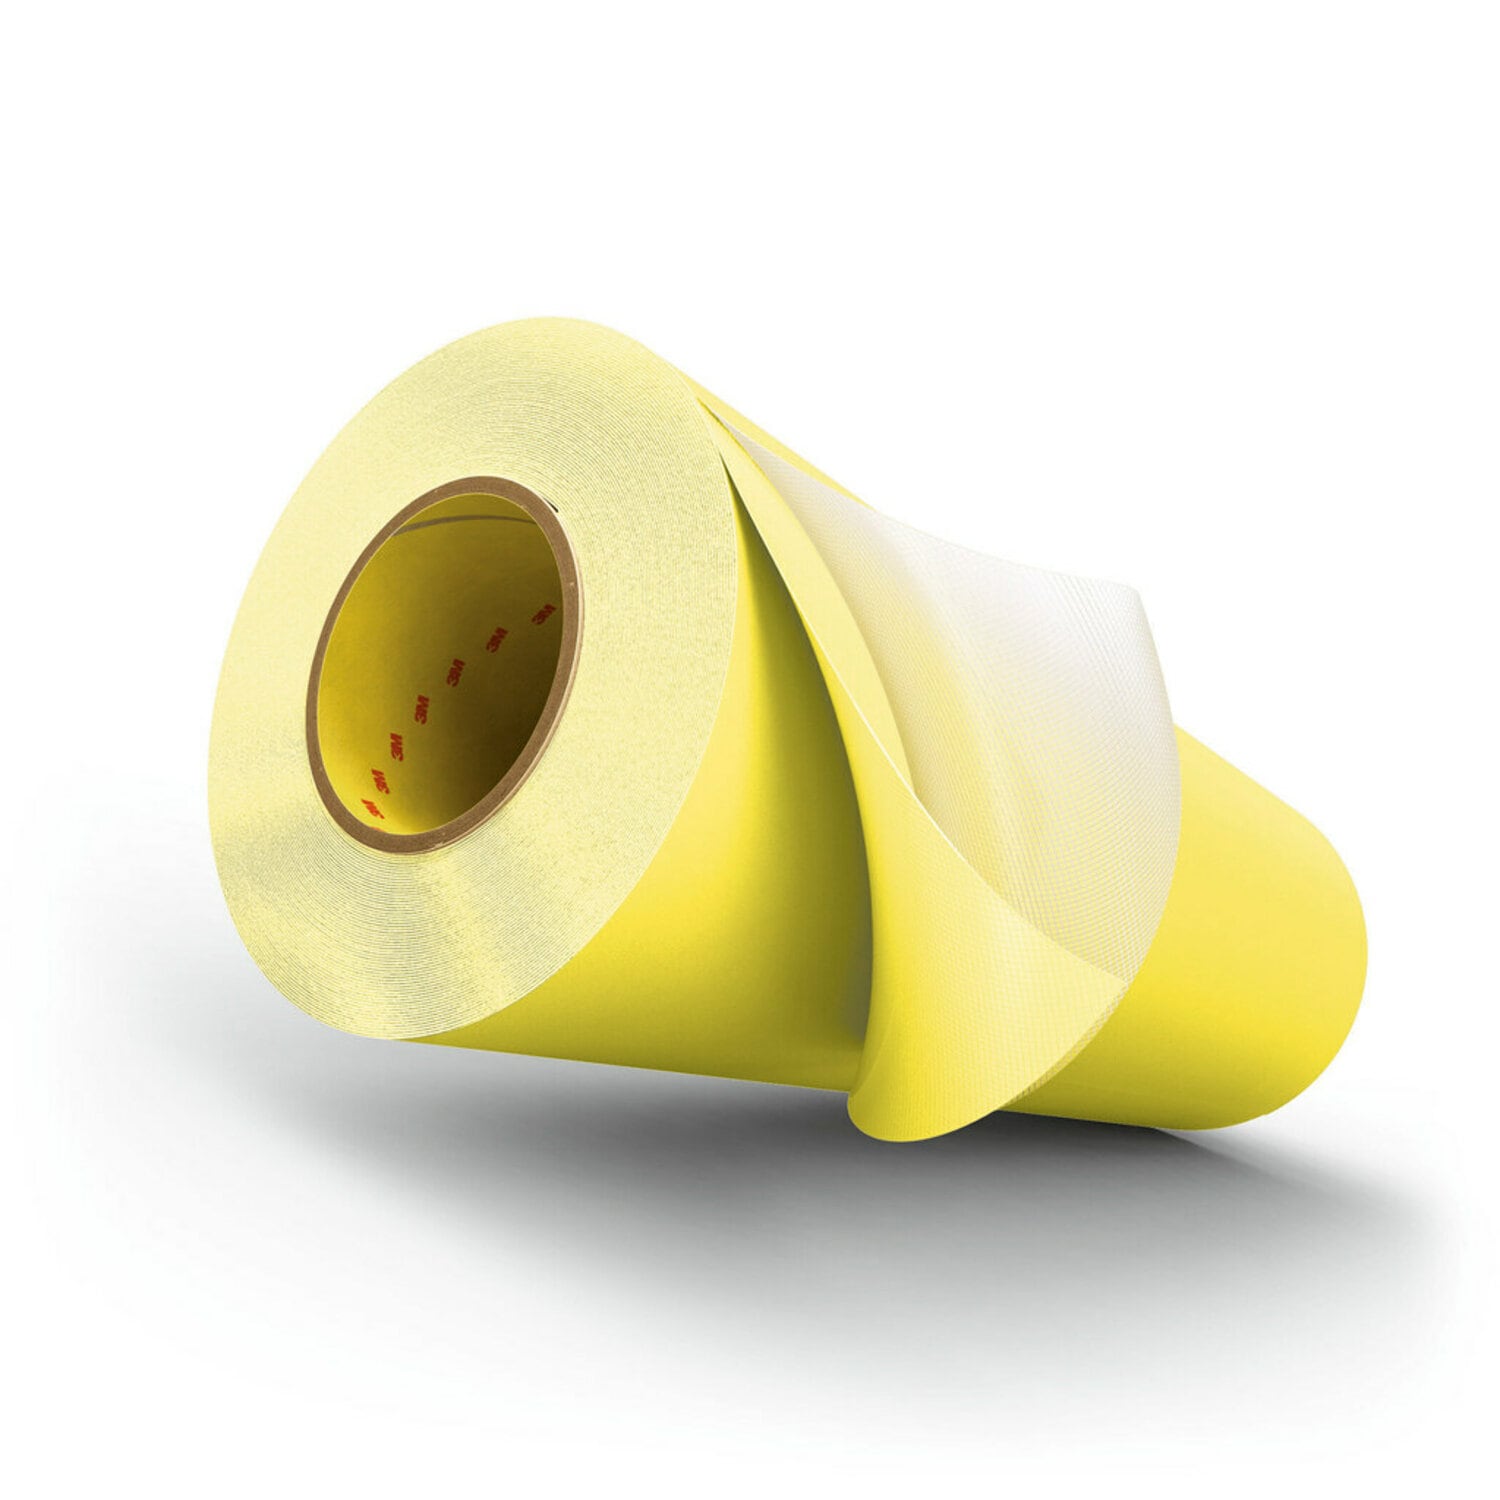 7100012524 - 3M Cushion-Mount Plus Plate Mounting Tape E1320H, Yellow, 20 mil,
Roll, Config